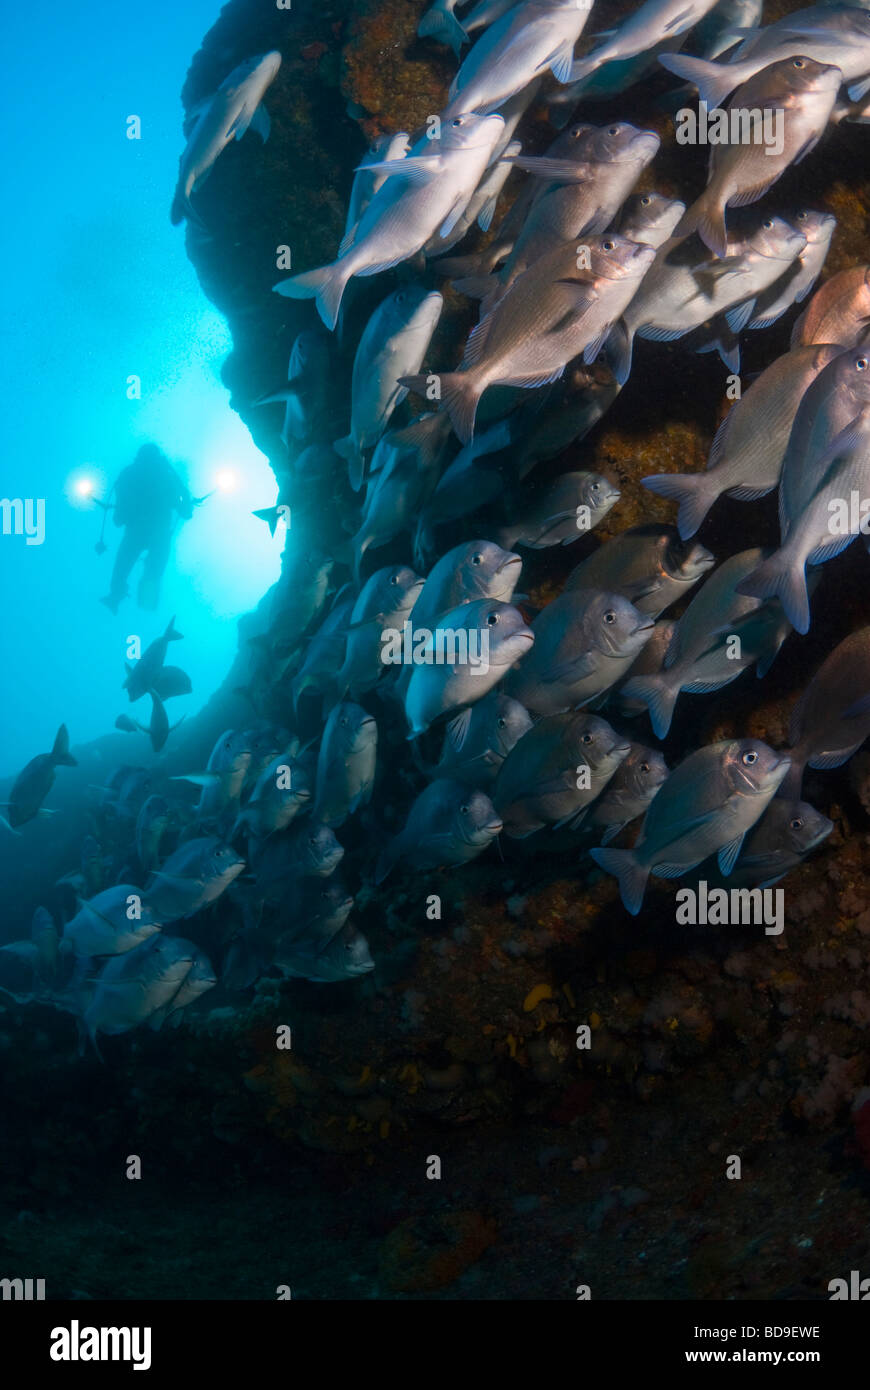 Scuba diver and schooling fish in Aliwal Shoal, South Africa Stock Photo